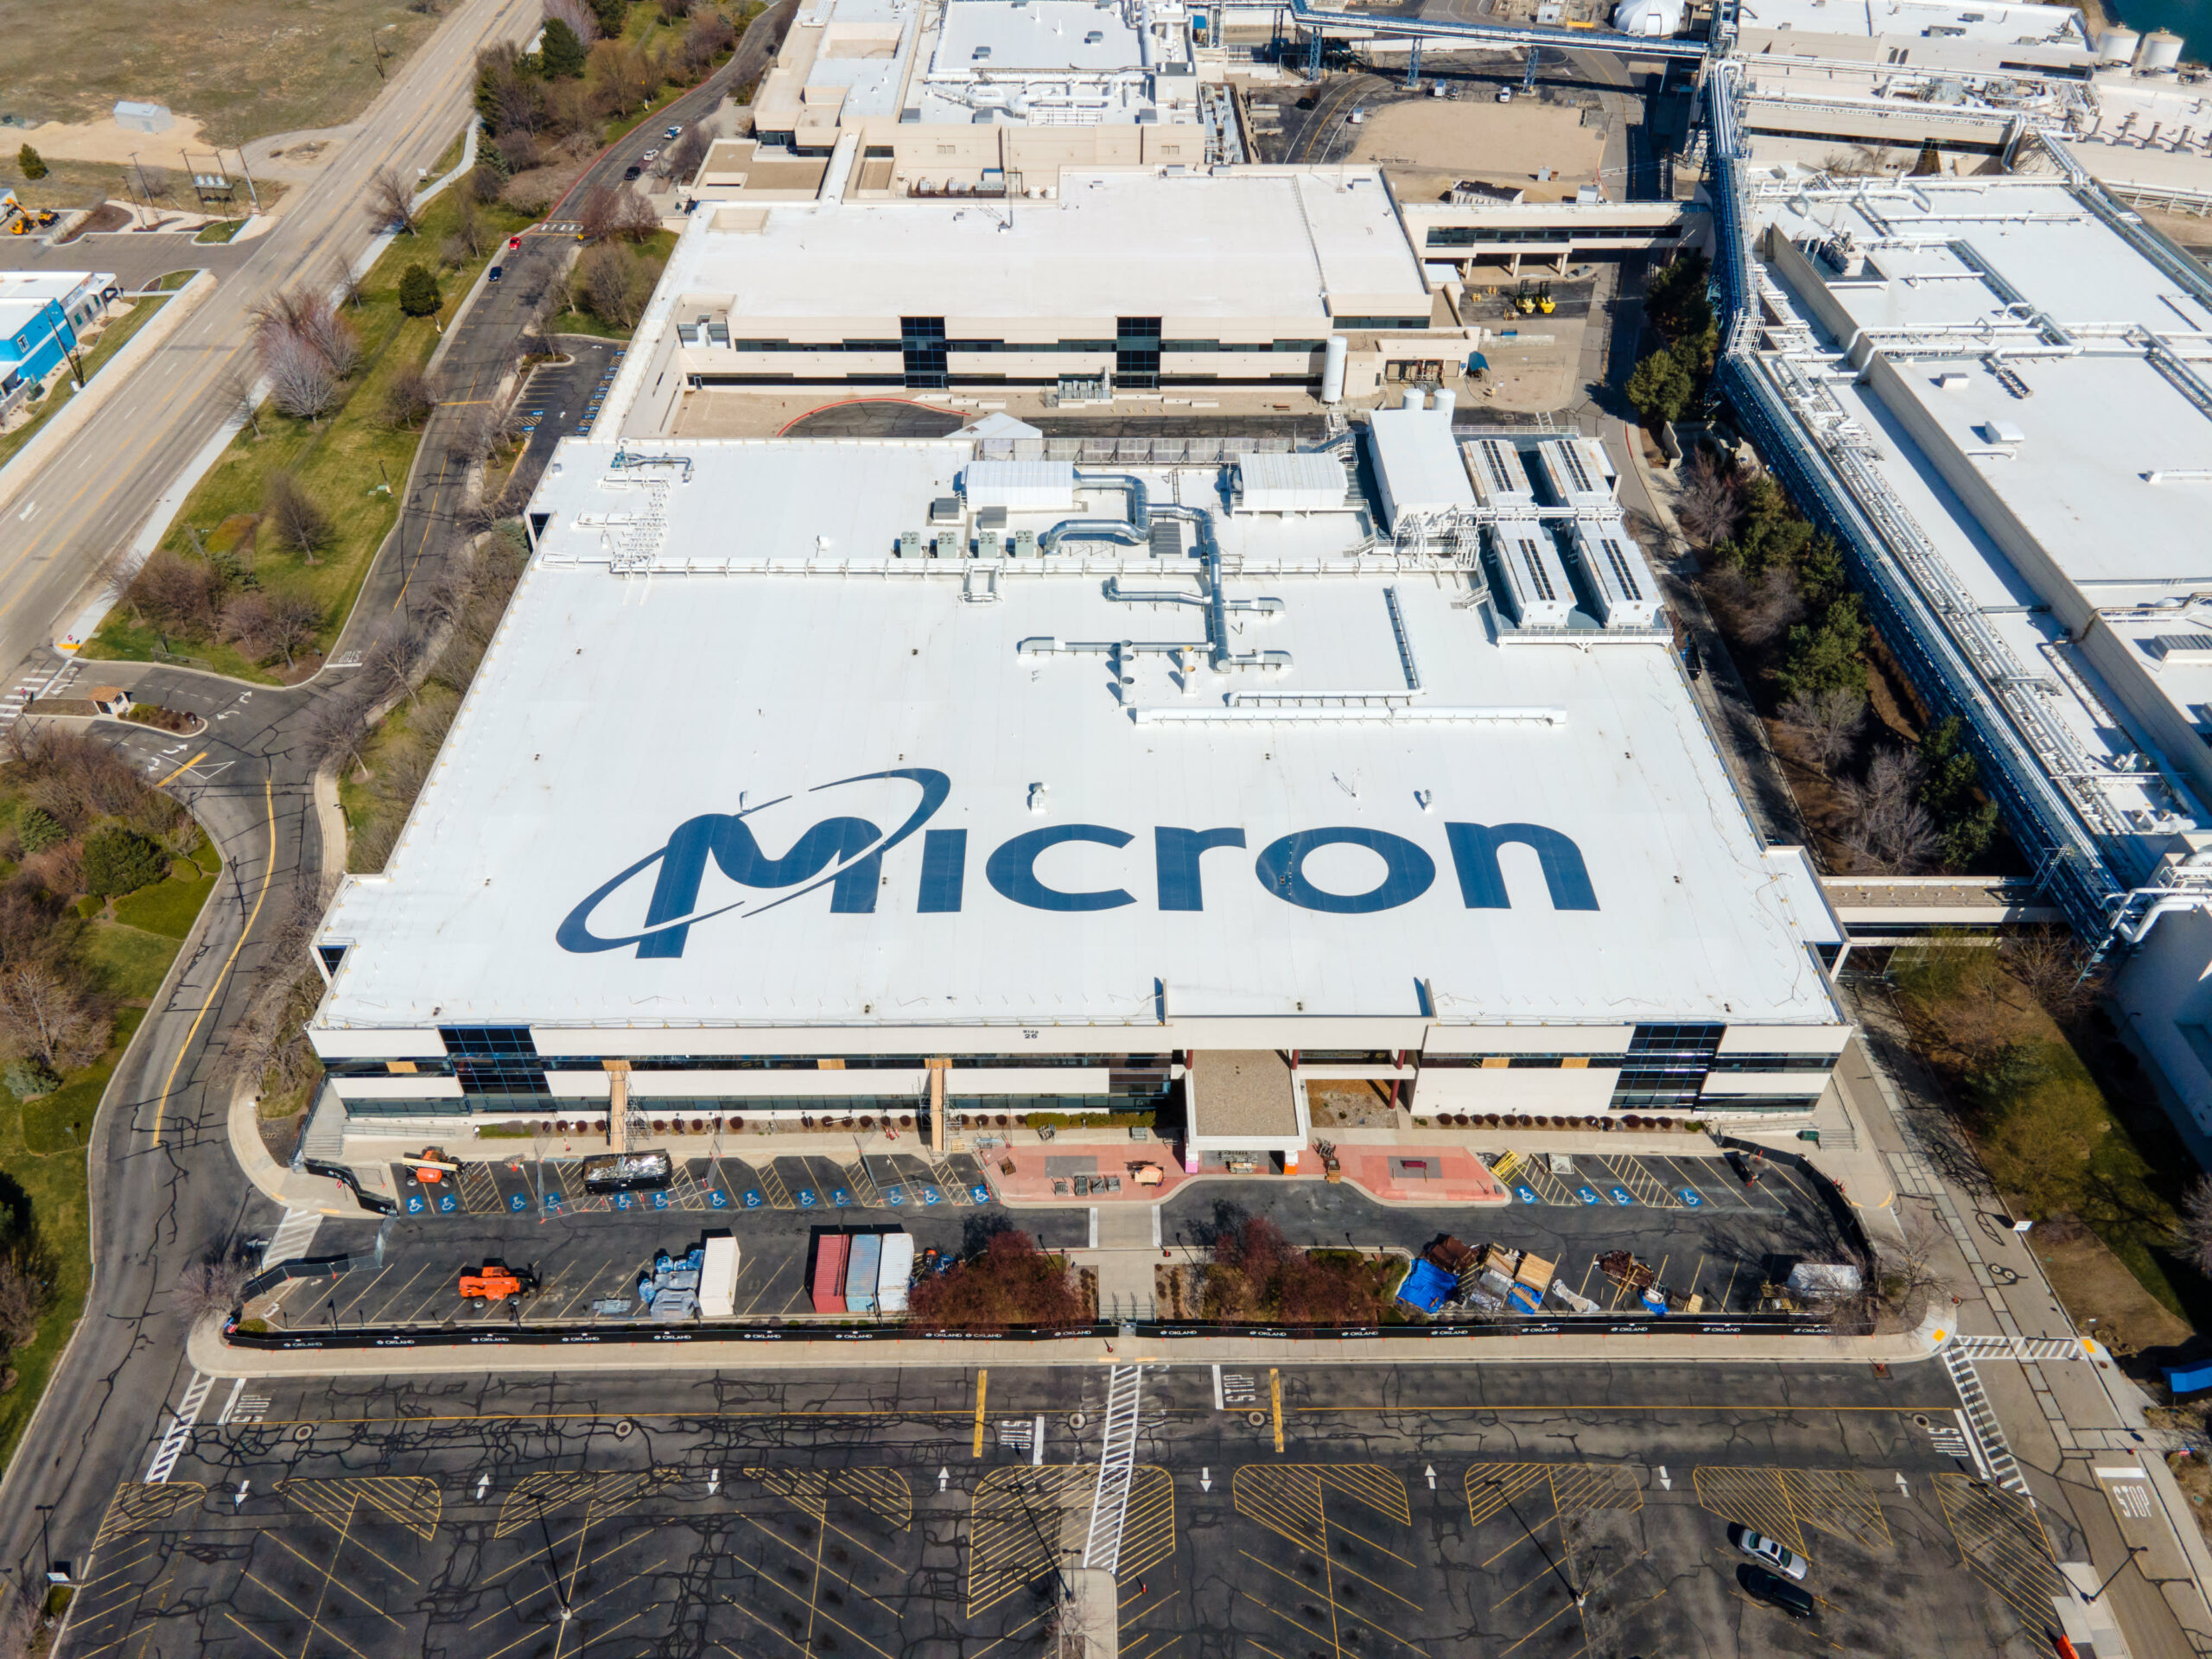 Micron’s strong quarter lifted the entire market Tuesday